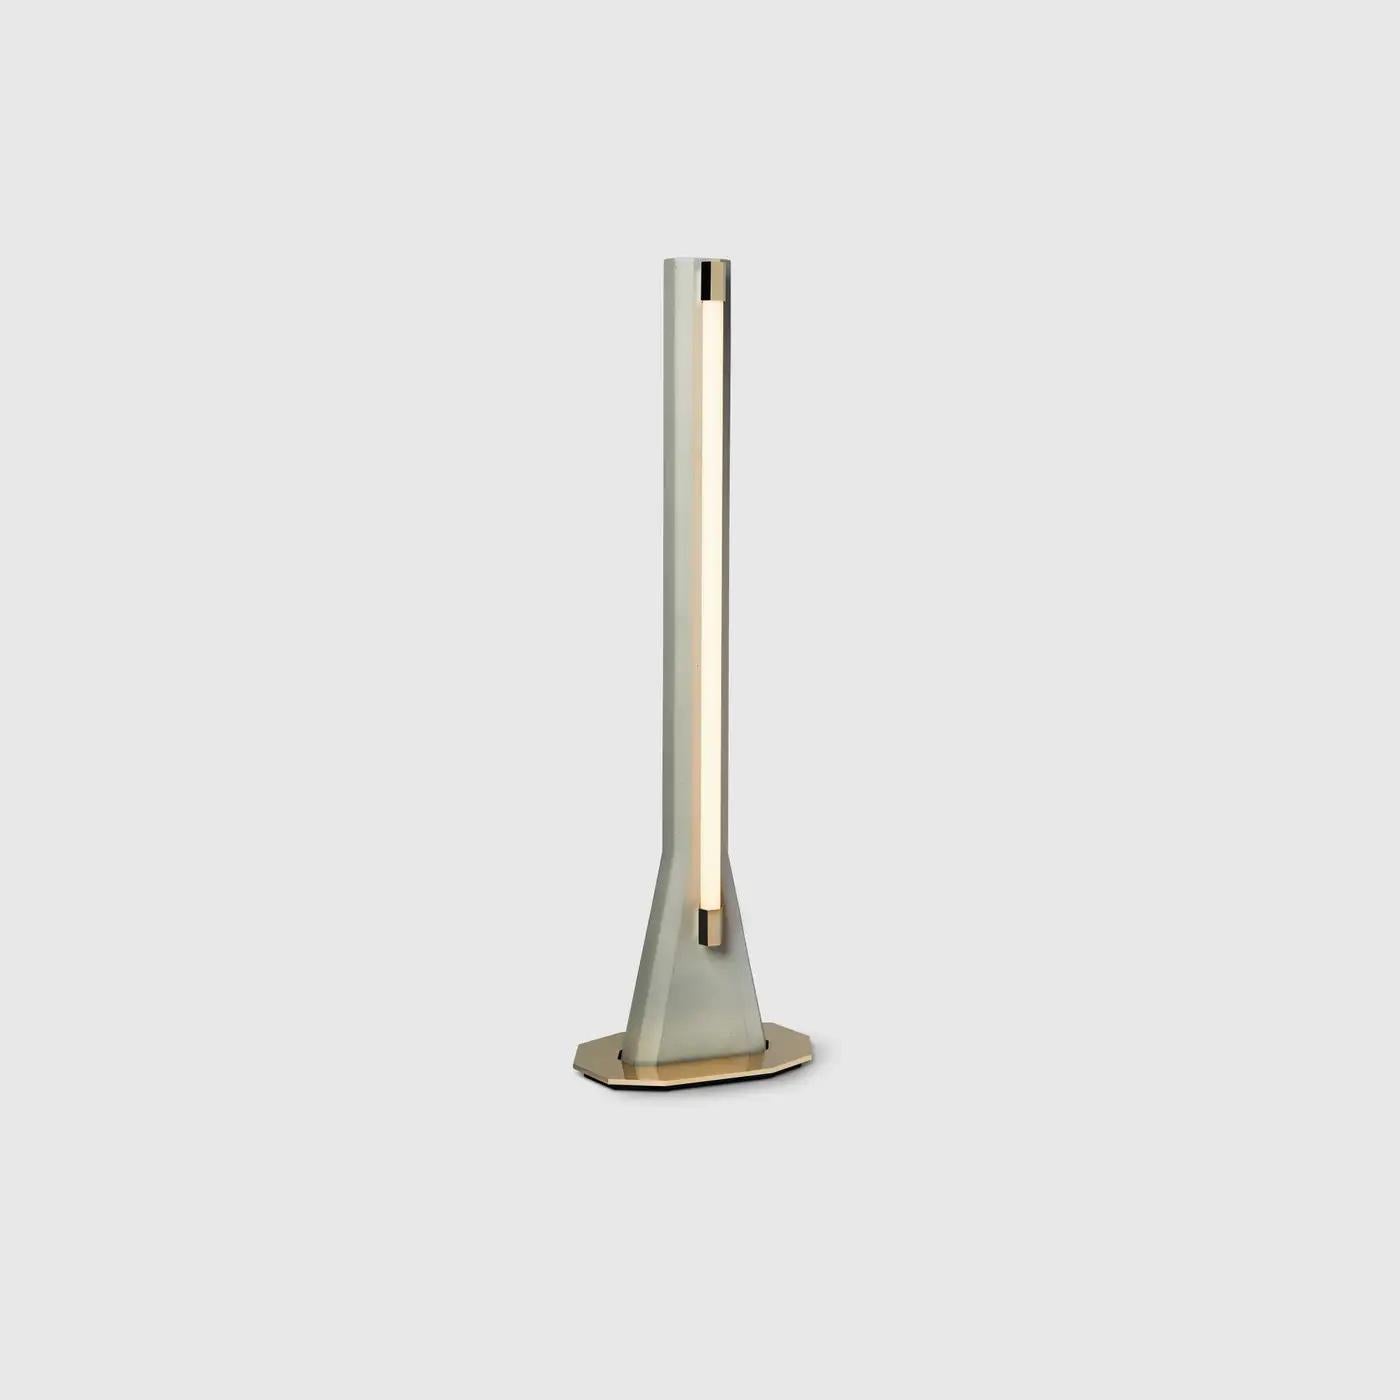 Floor lamp 'Ginza' by Man of Parts 
Signed by Victoria Wilmotte 

Alfa French grey cement compound
Polished gold steel base and details

Dimensions: 
H. 152 x W. 48 x D. 29 cm

Dimmable LED
3 000 Kelvins, 60W

UL Listed 

_____________________

The